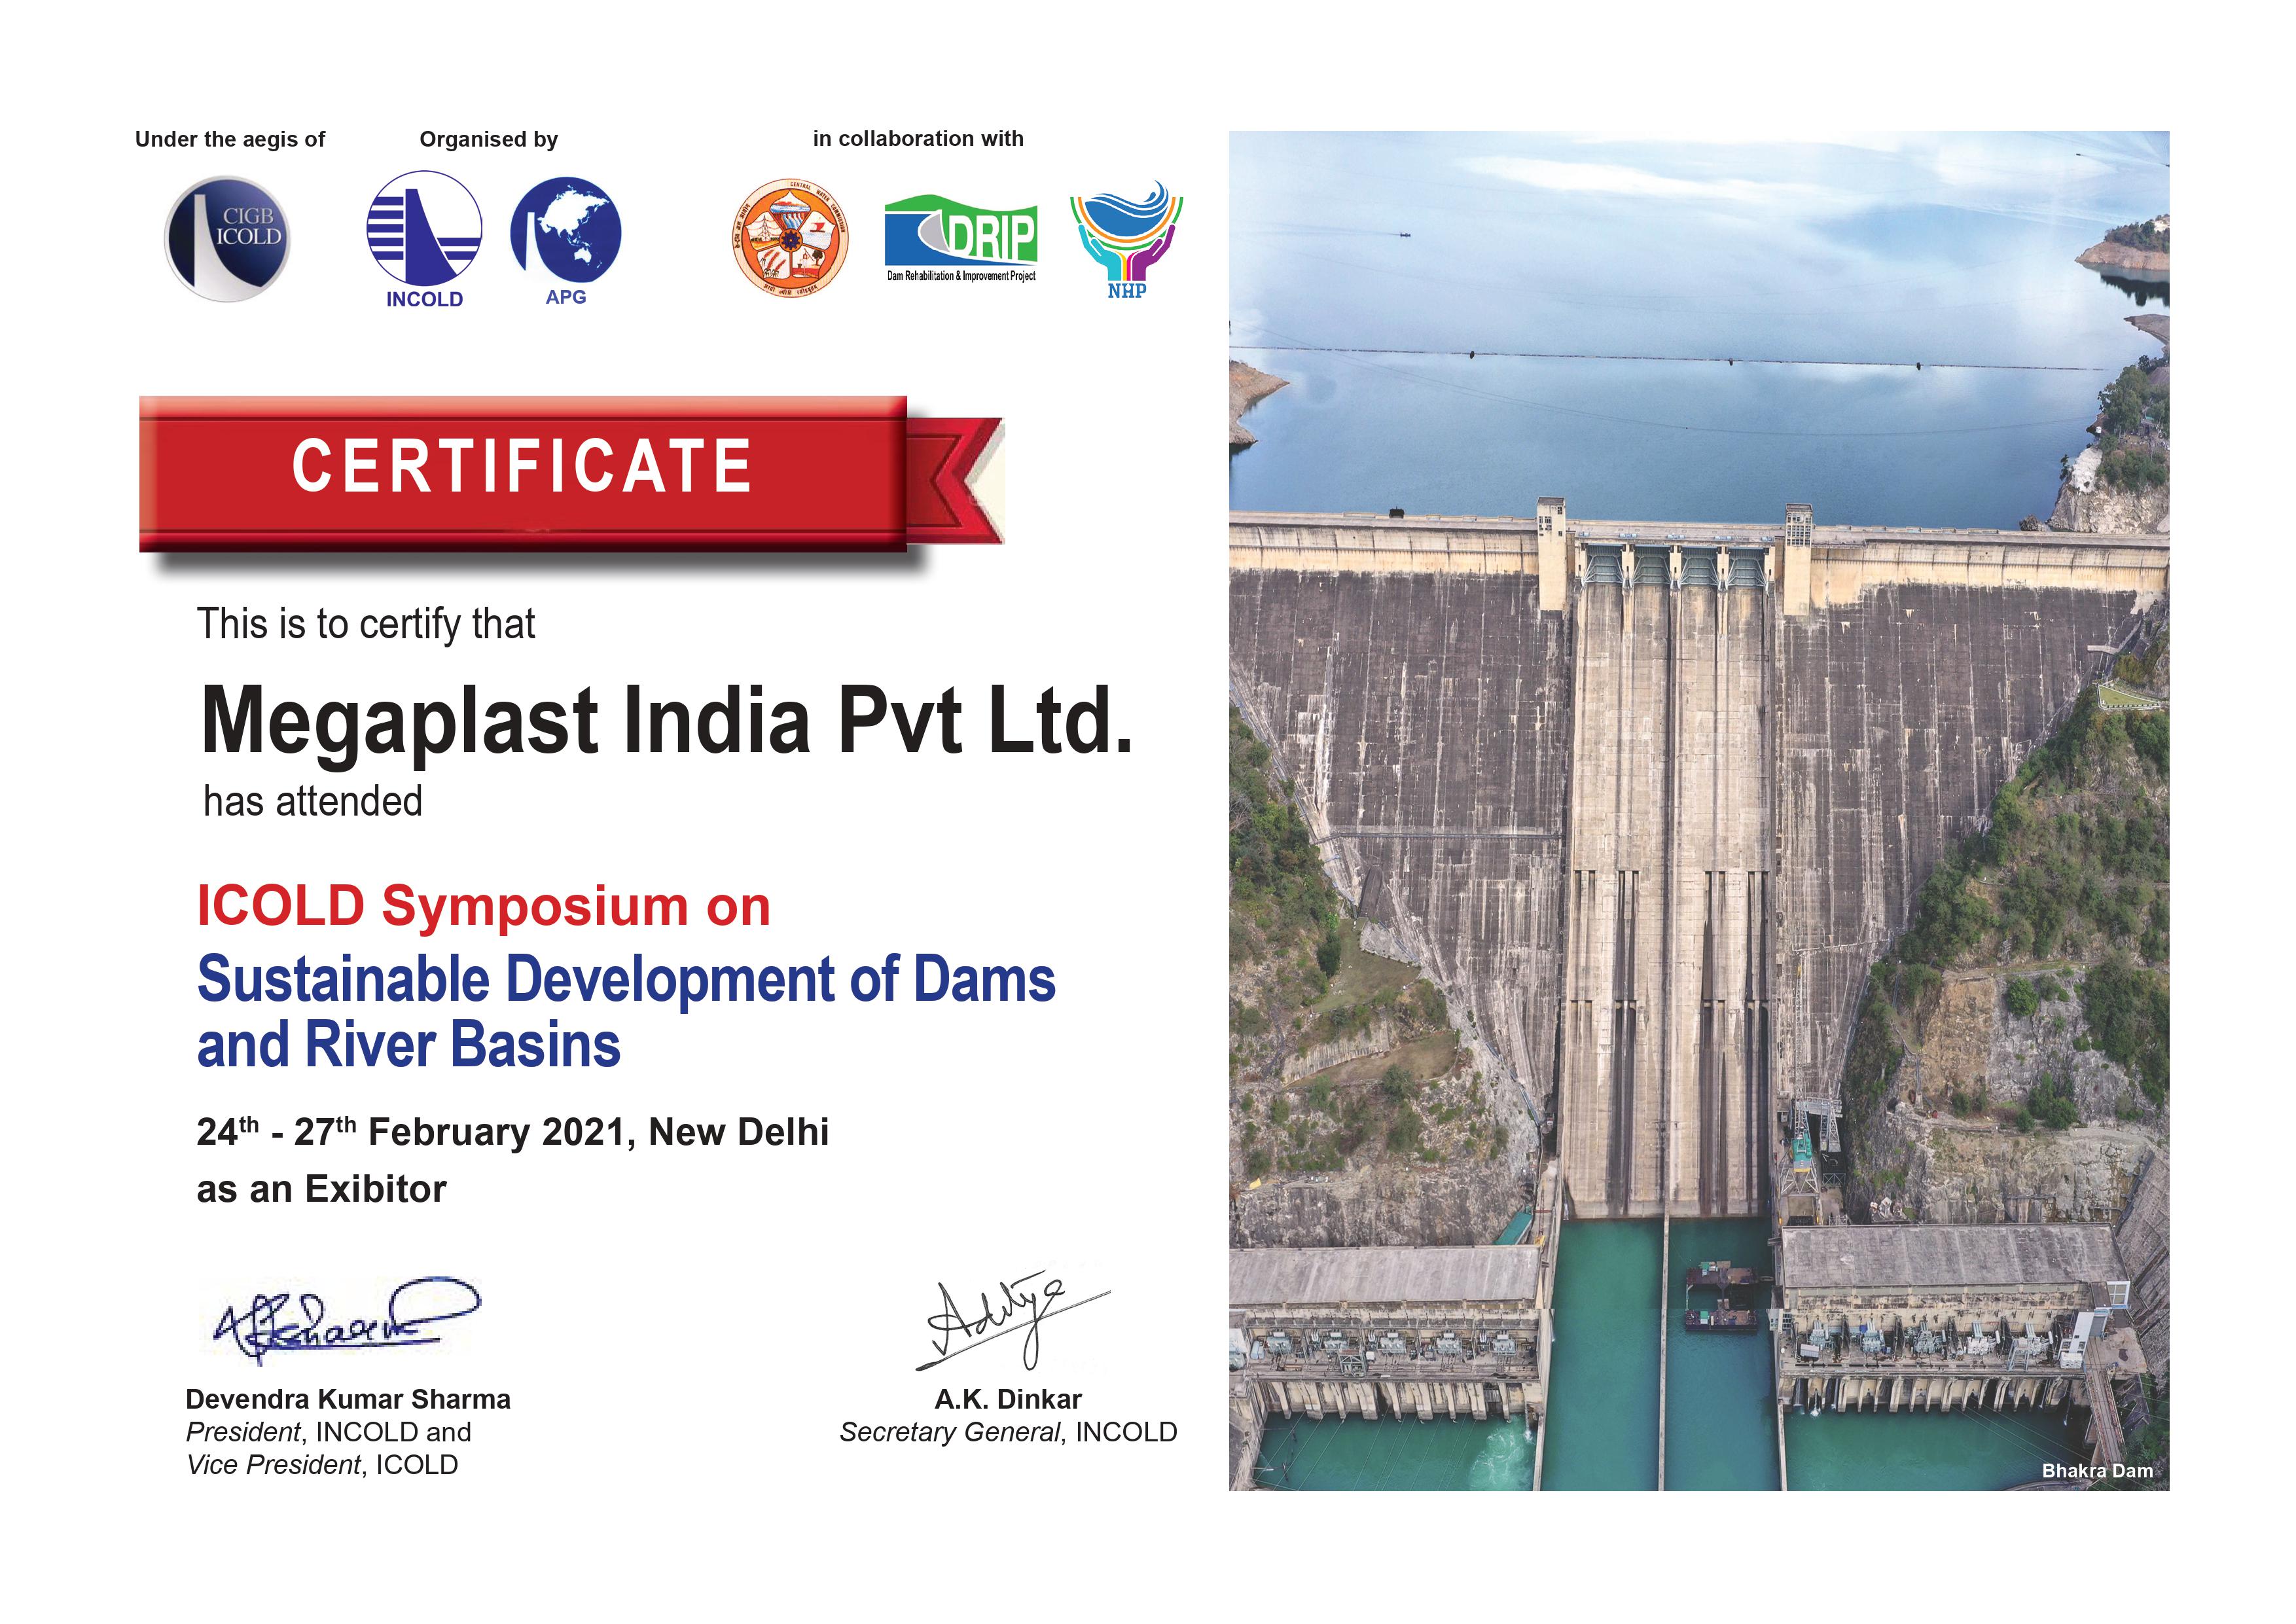 Megaplast participated in the Exhibition ICOLD Symposium on Sustainable Development of Dams and River Basins, 24th-27th February 2021